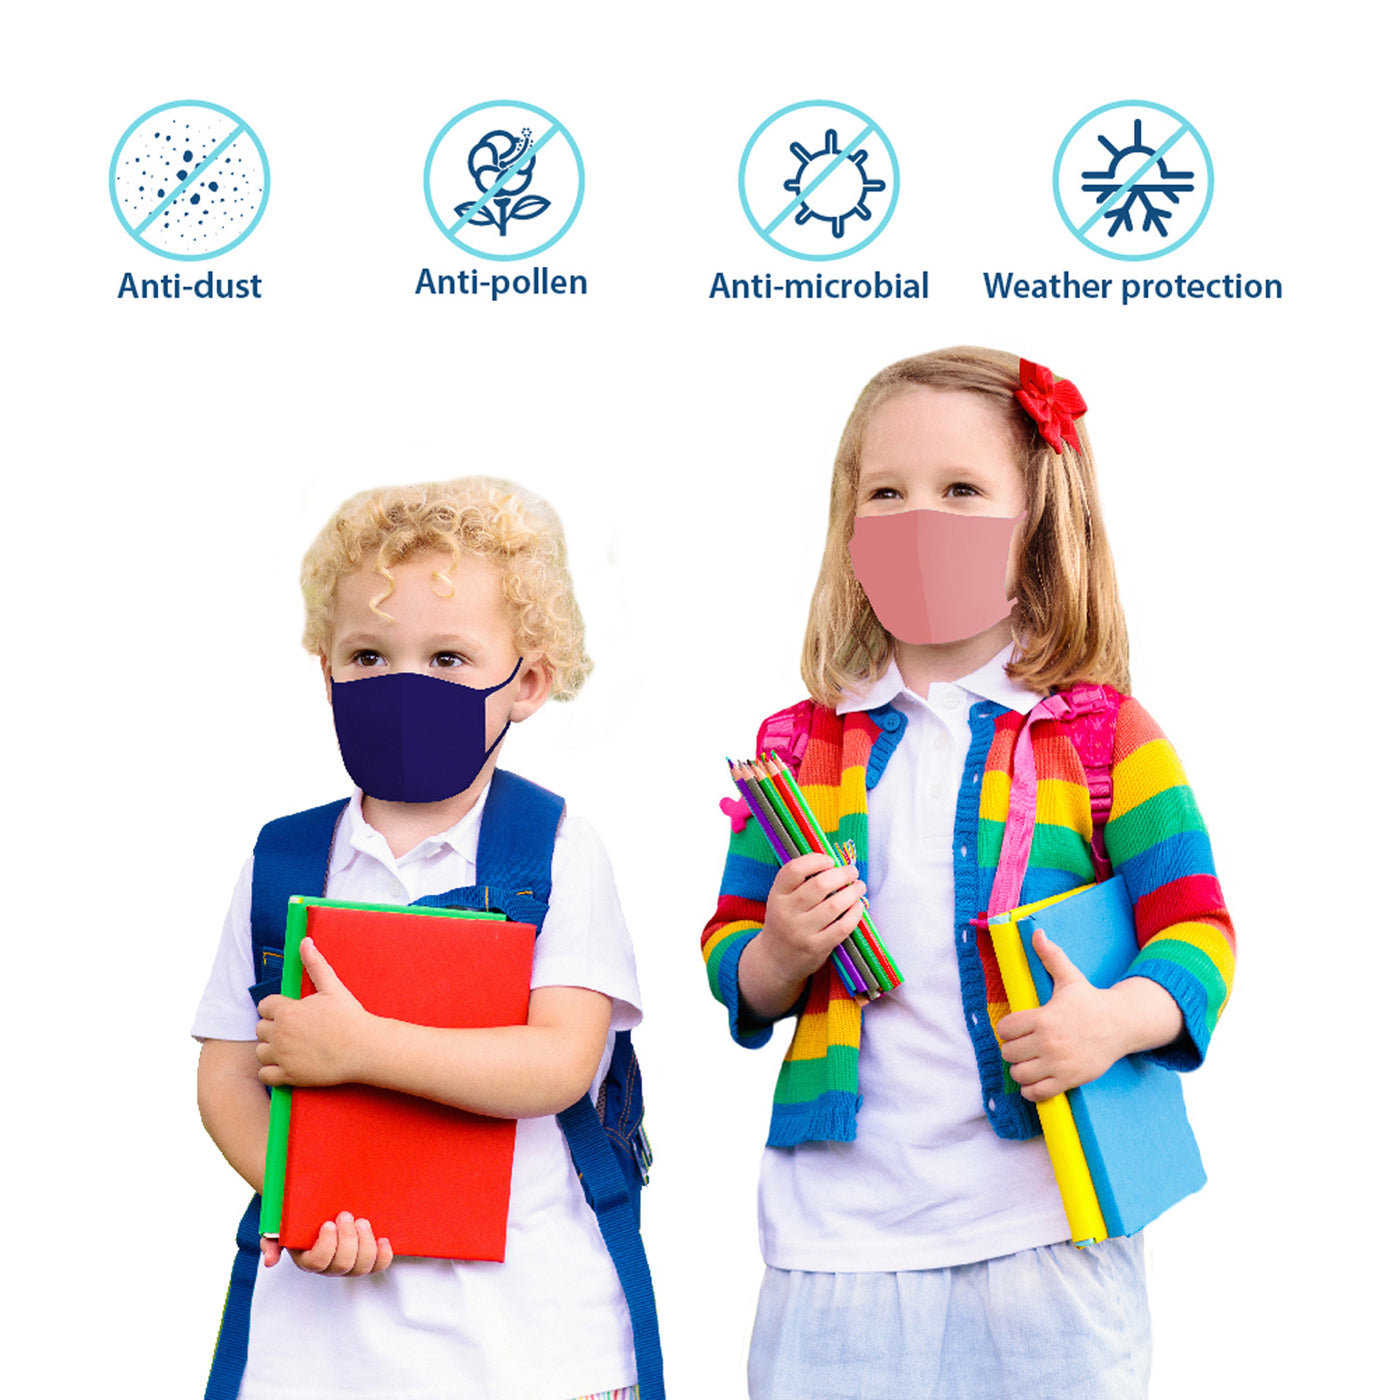 Kids Fabric Face Mask Navy (reusable, washable, 3 layers)